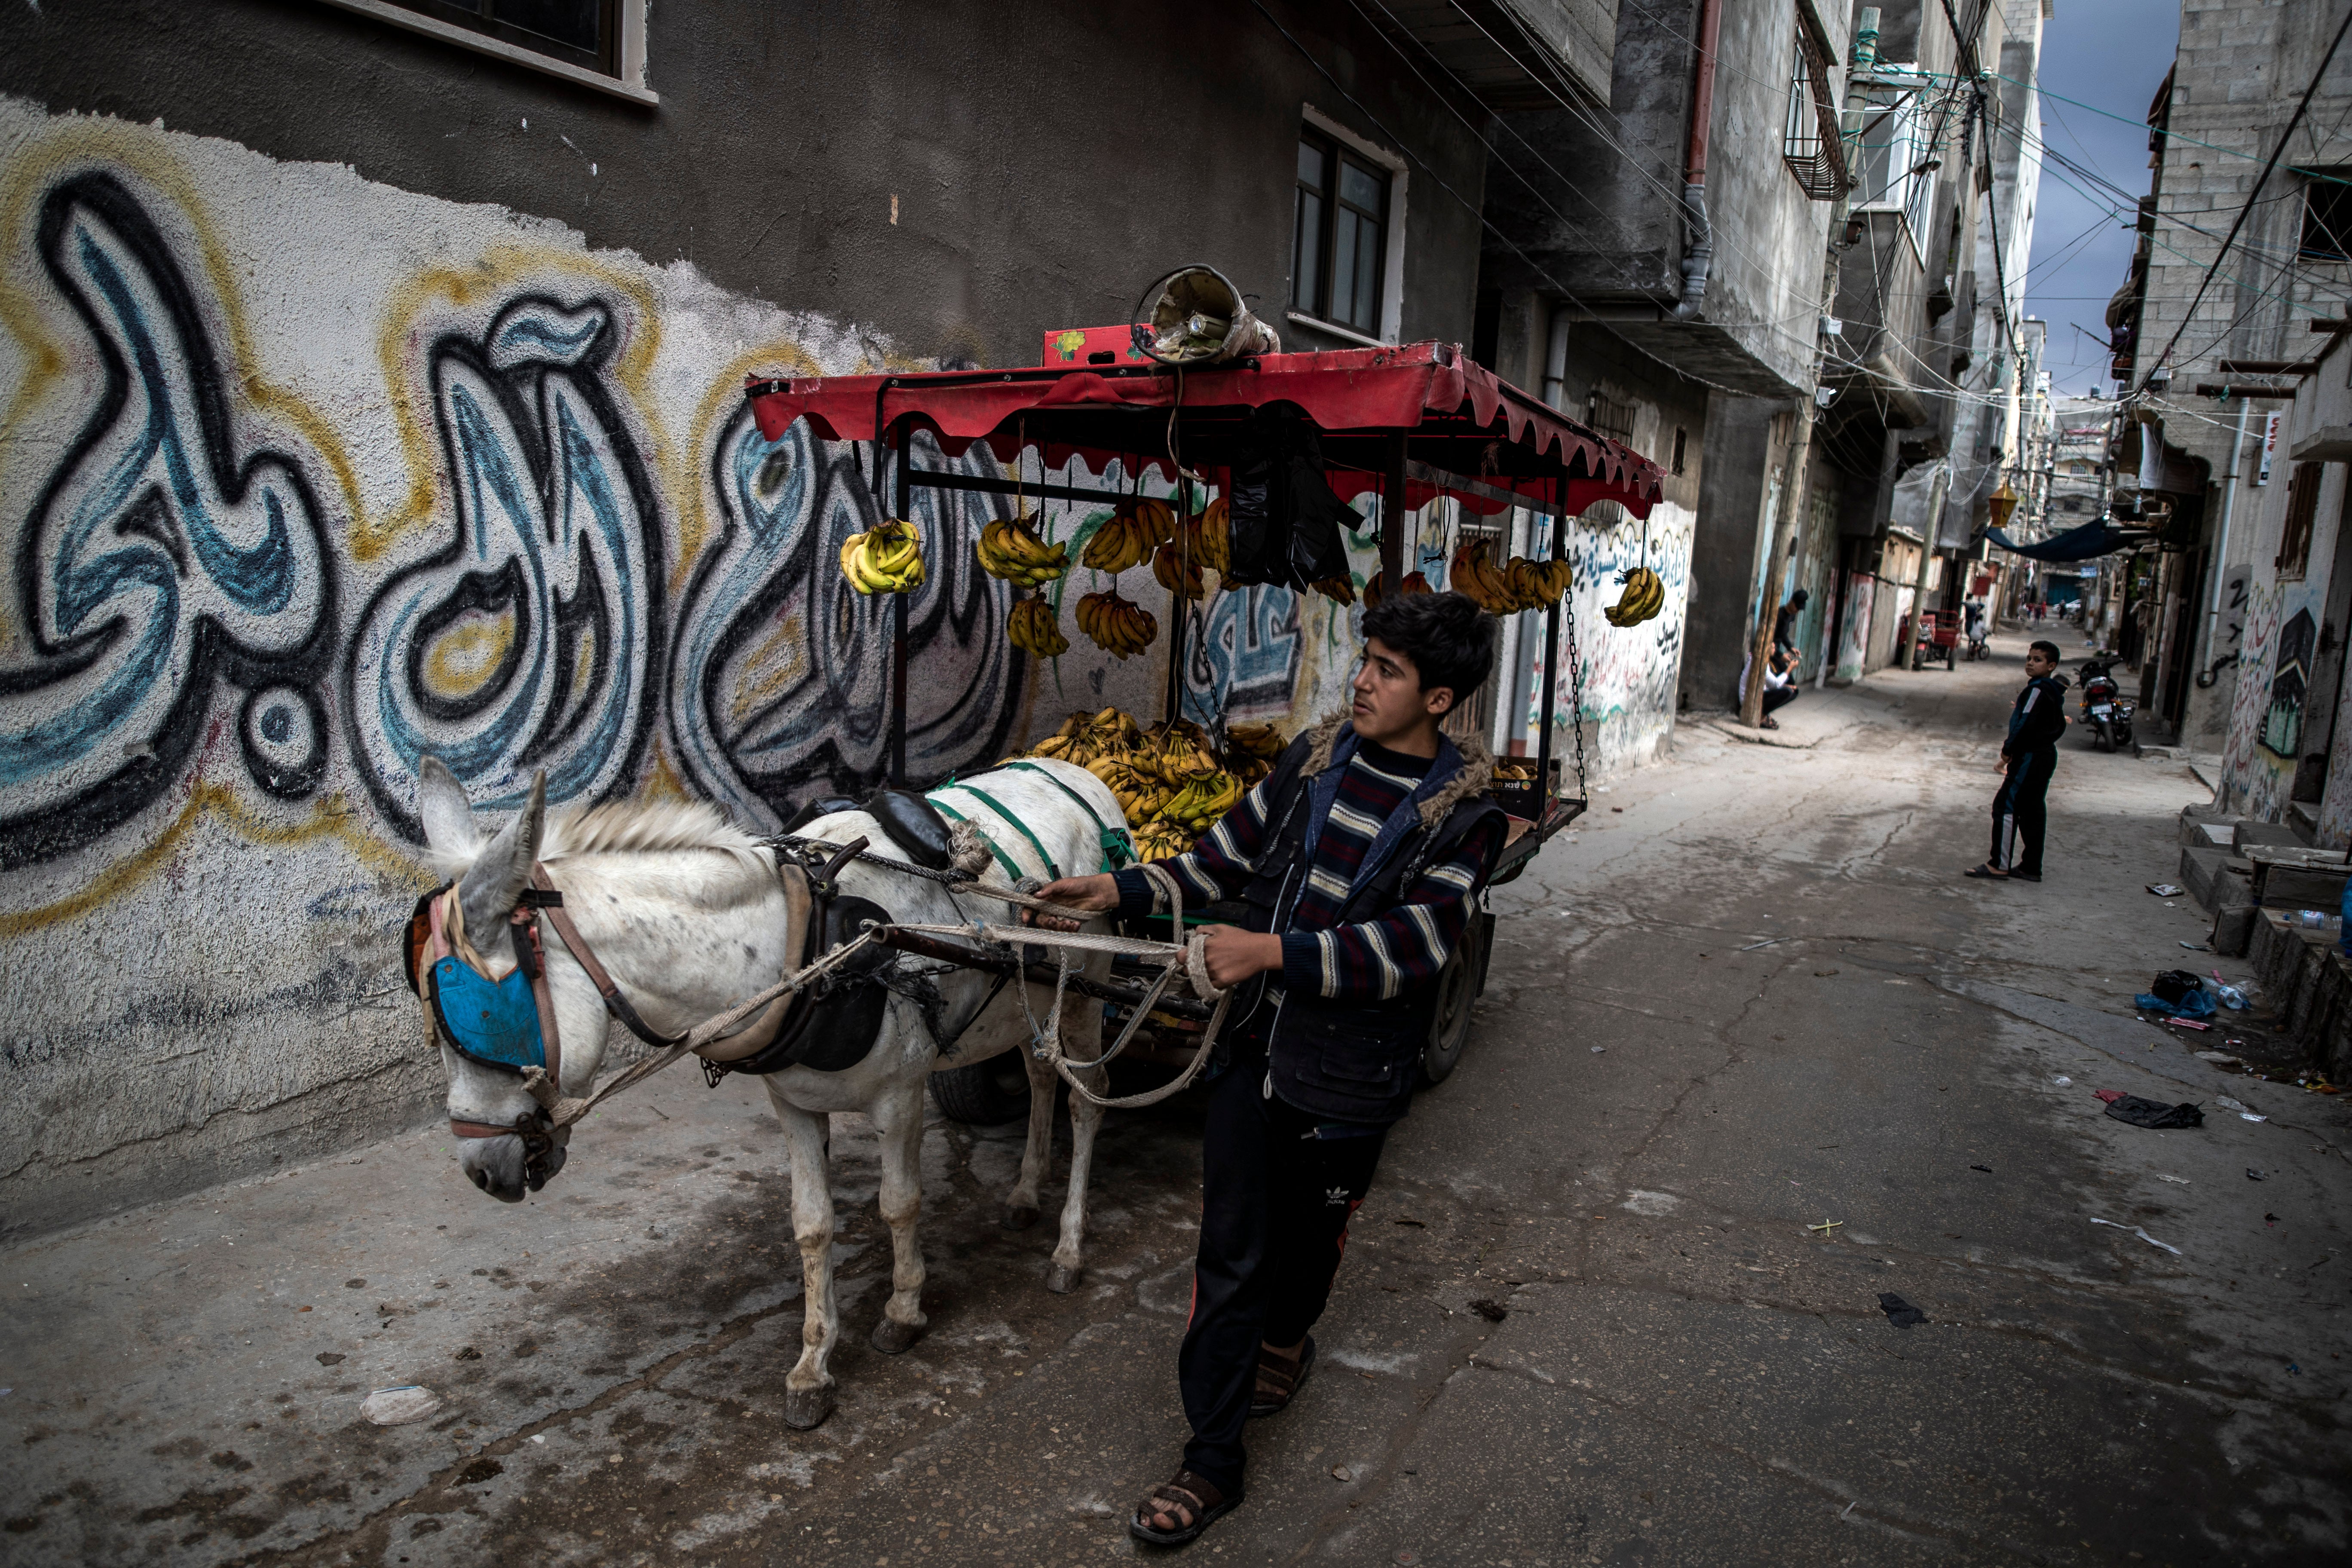 <p>A Palestinian boy sells bananas on a donkey cart in an alley in the Shati refugee camp in Gaza City</p>